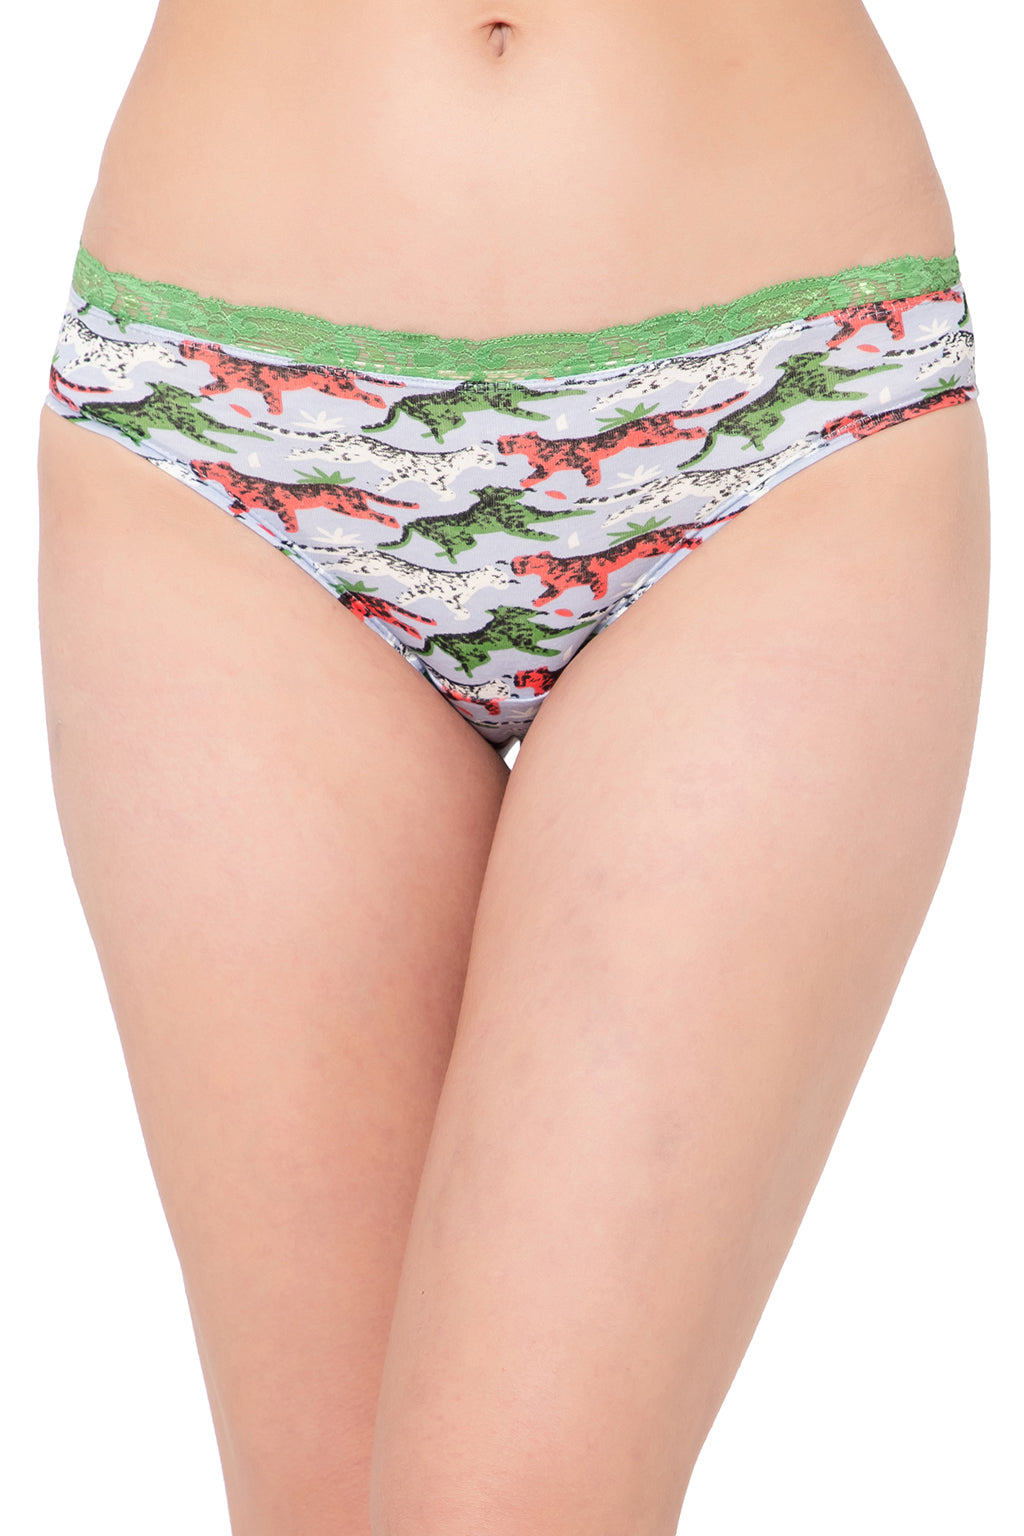 Low Waist Tiger Print Bikini Panty in Multicolour with Lace Waist